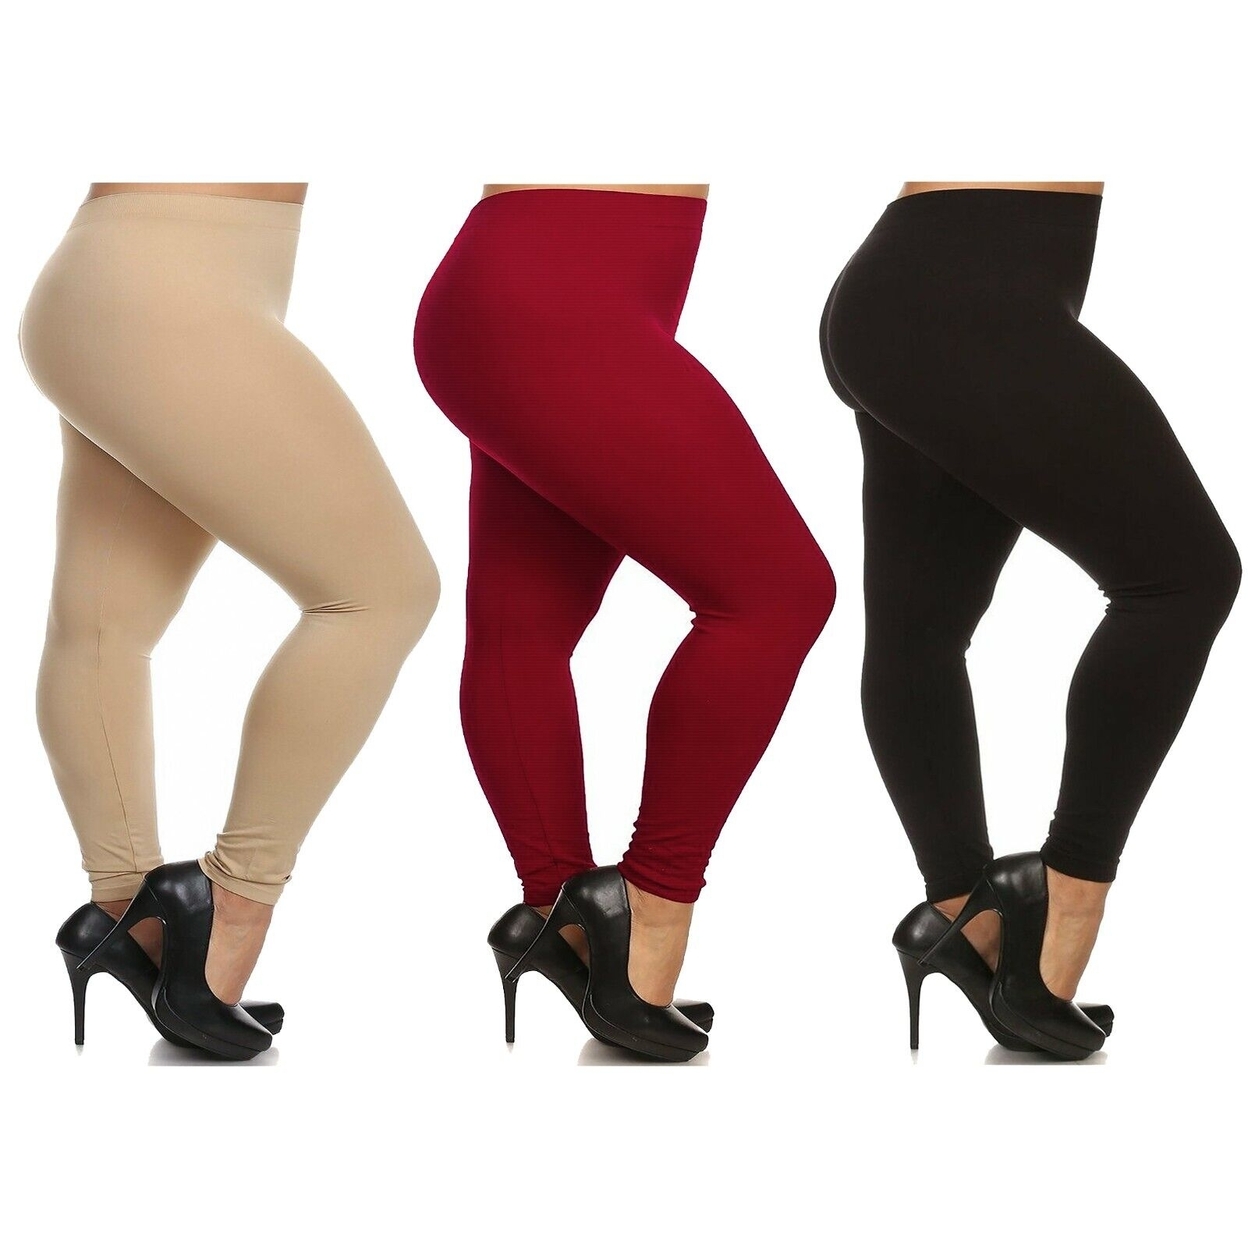 3-Pack: Women's Casual Ultra-Soft Smooth High Waisted Athletic Active Yoga Leggings Plus Size Available - Beige,beige,beige, 4x